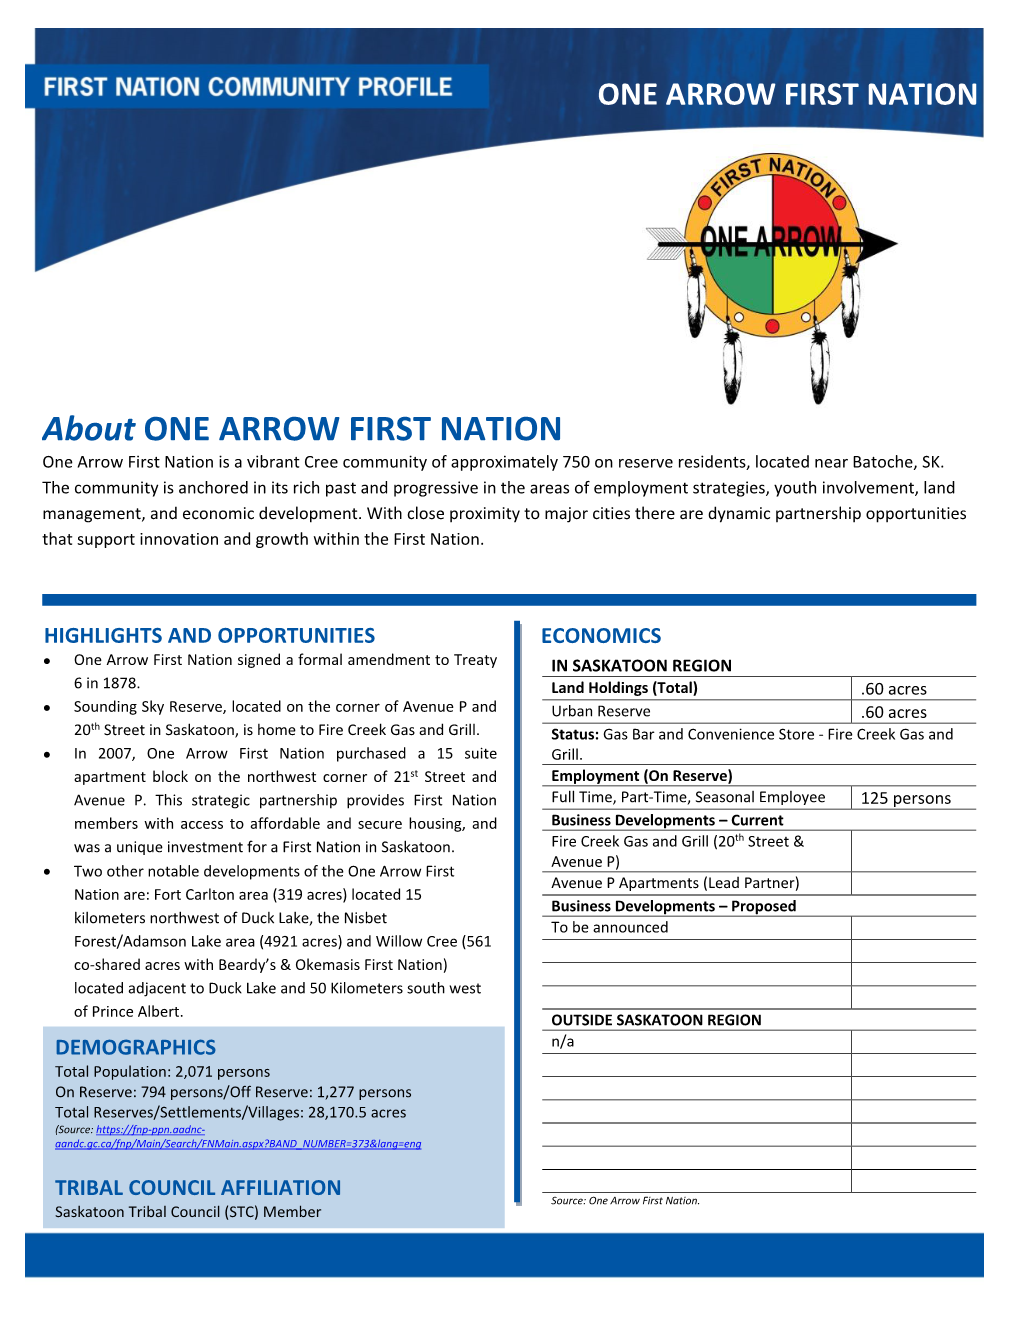 One Arrow First Nation